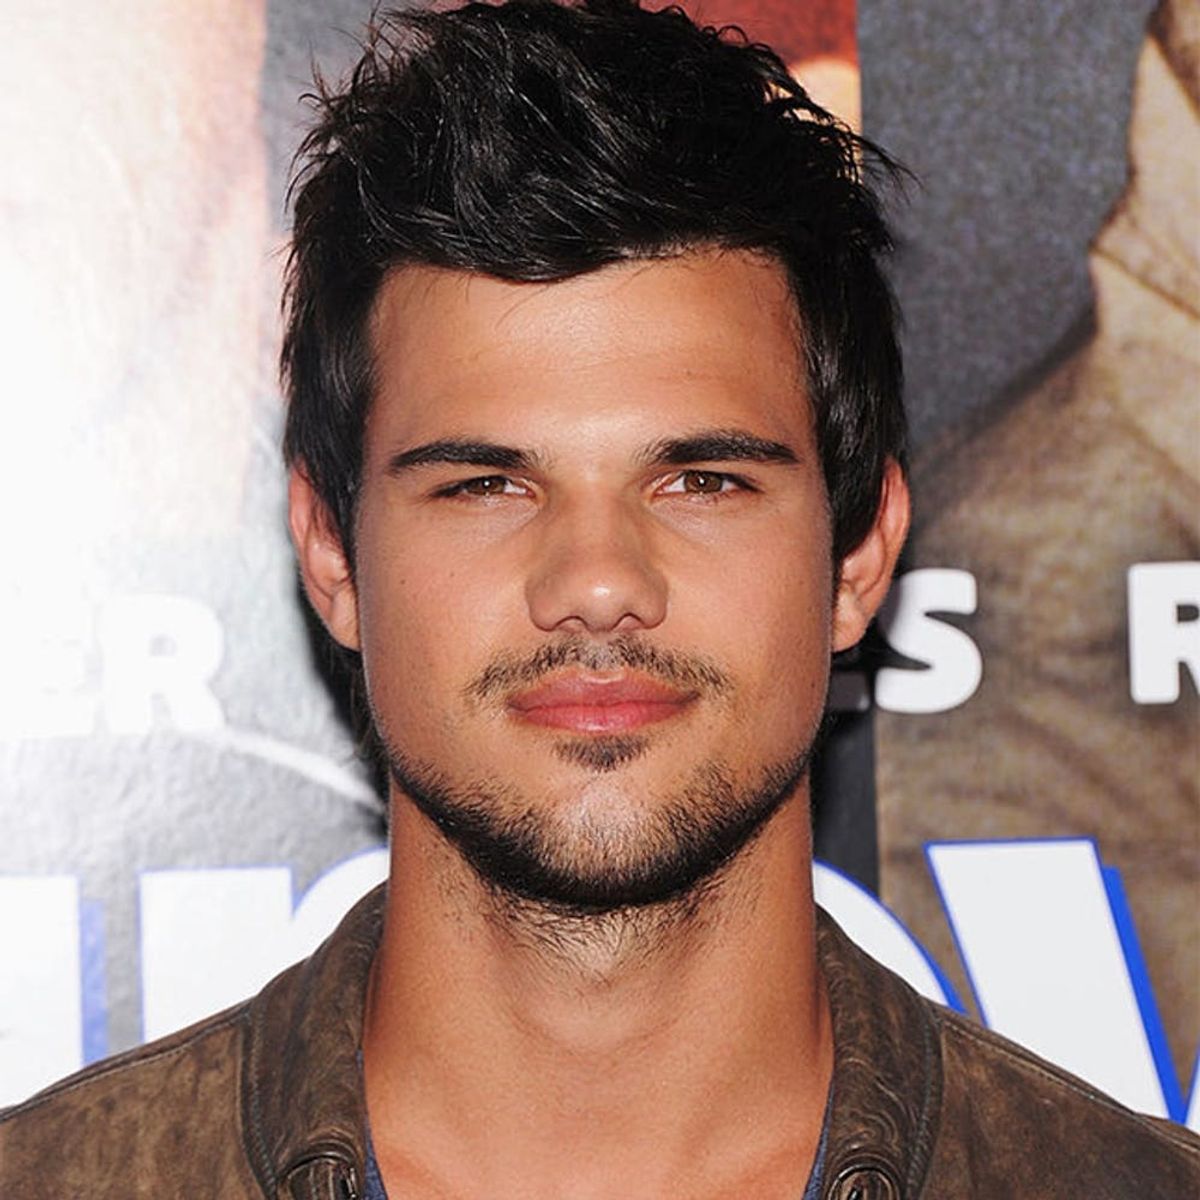 Taylor Lautner’s First Ever Instagram Proves He’s Already a Total Pro